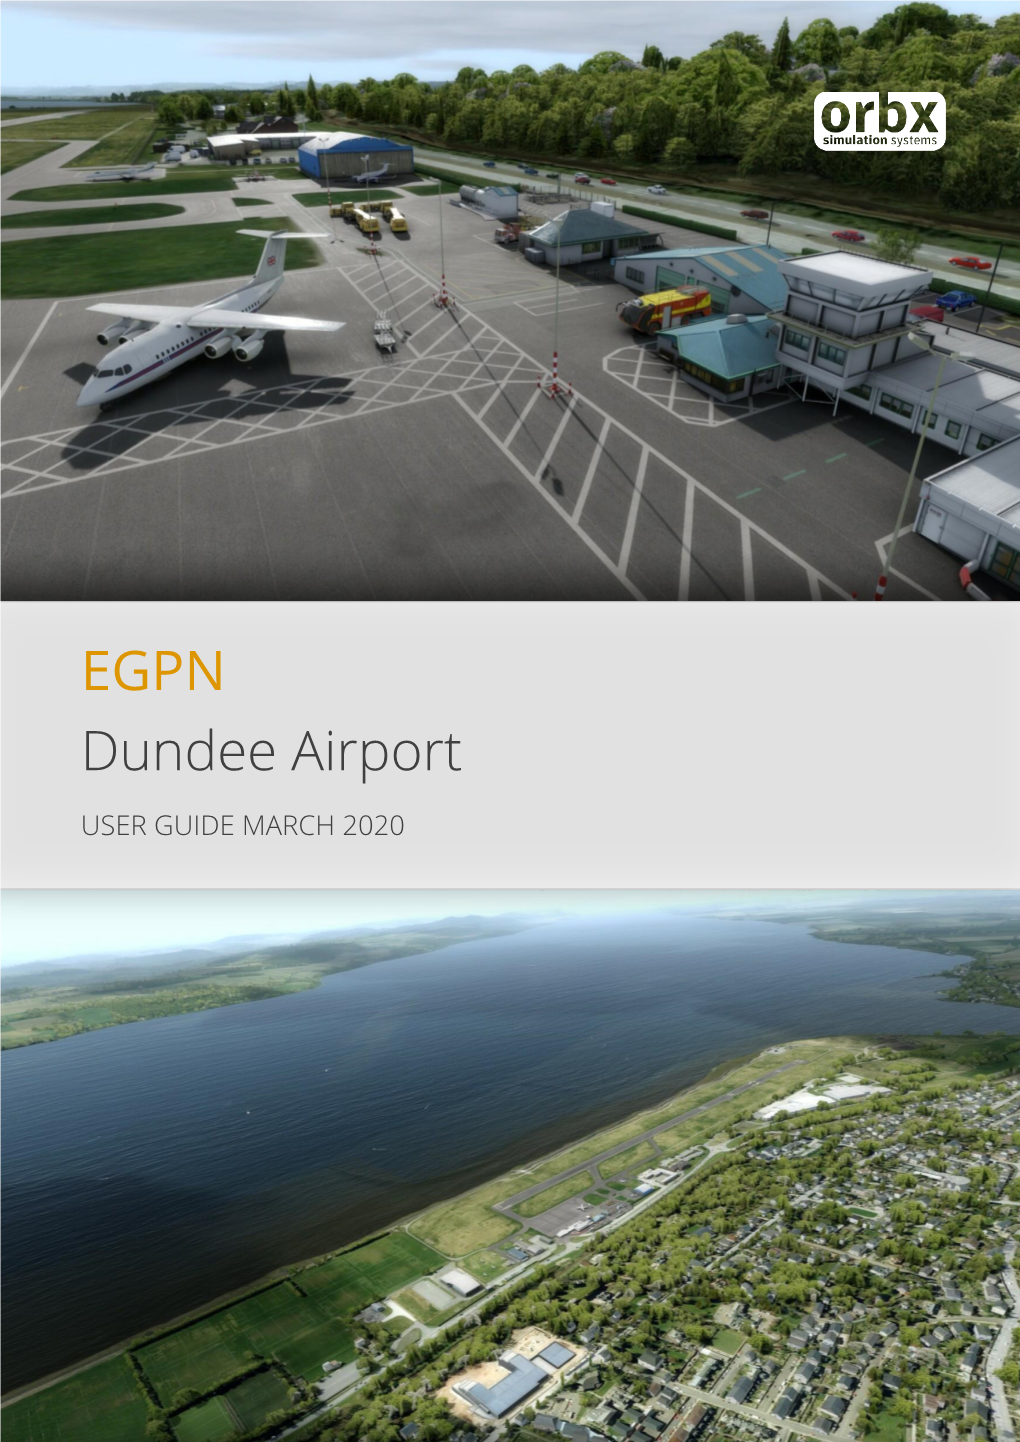 EGPN Dundee Airport!